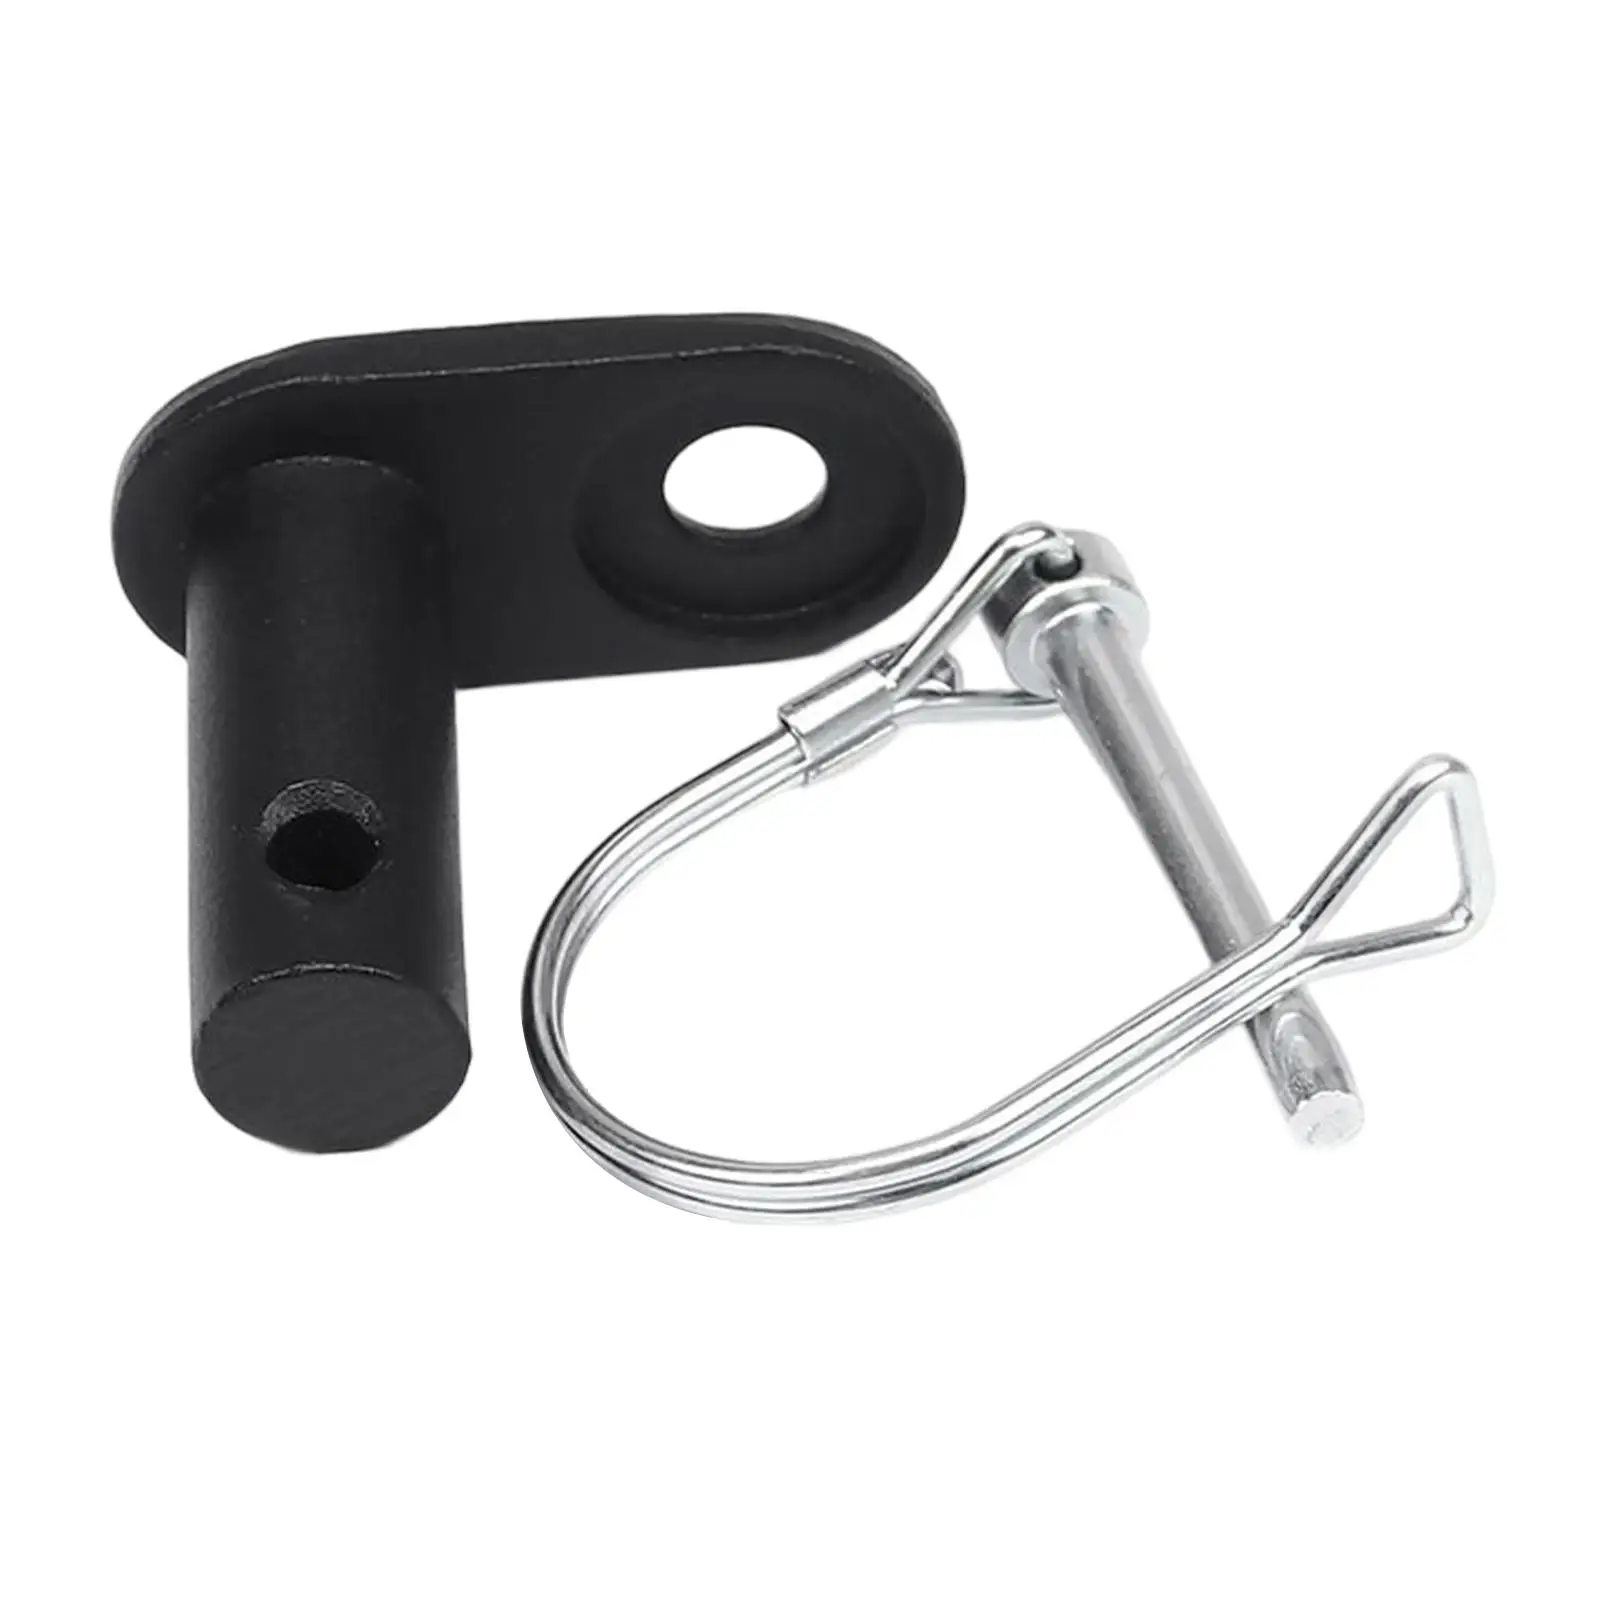 Bike Trailer Hitch Durable Connector Bicycle Trailer Coupler Steel Practical